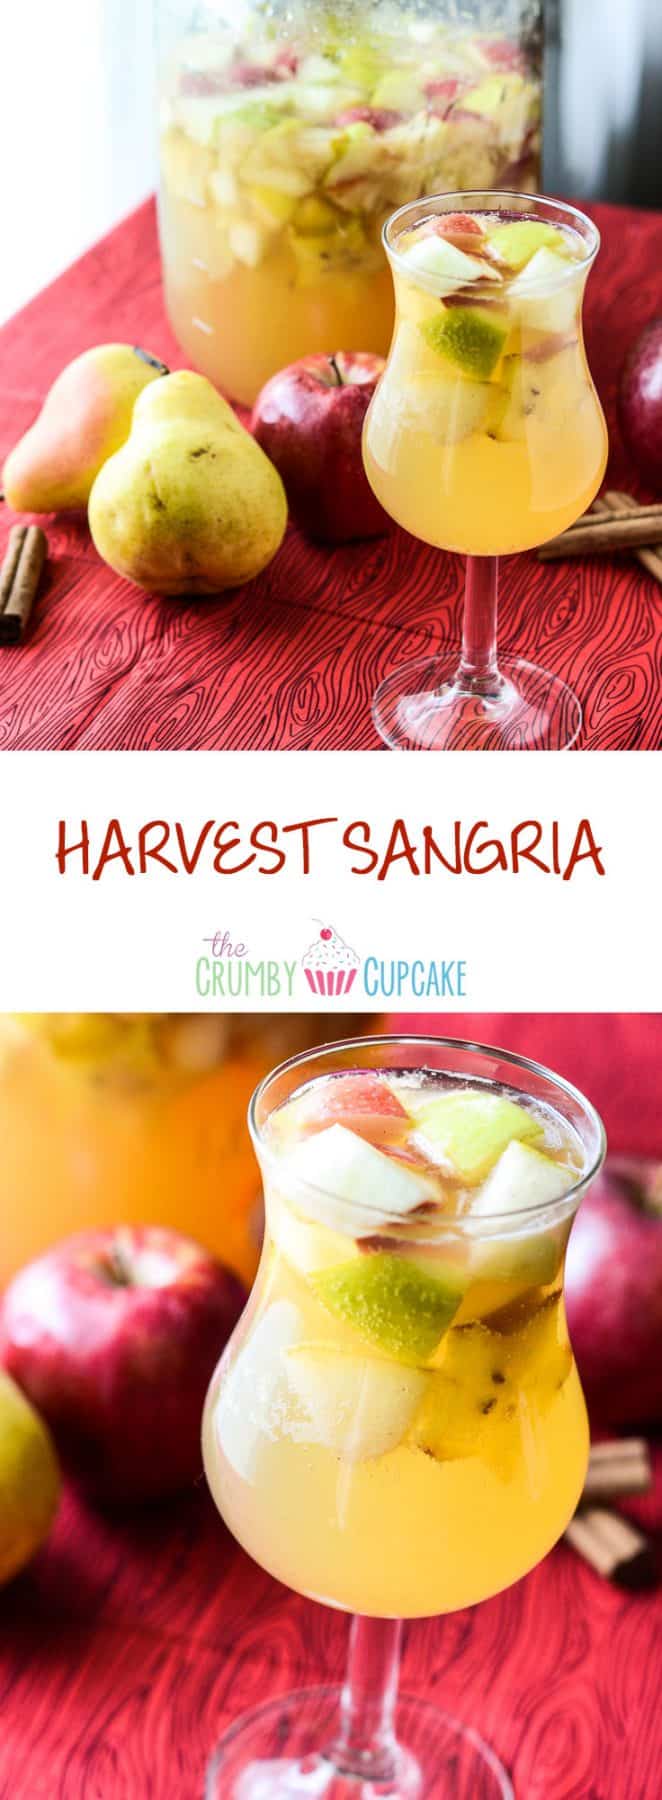 Harvest Sangria | a warm, autumn blend of apple, pear, ginger, and cinnamon spice, steeped with your favorite white wine!